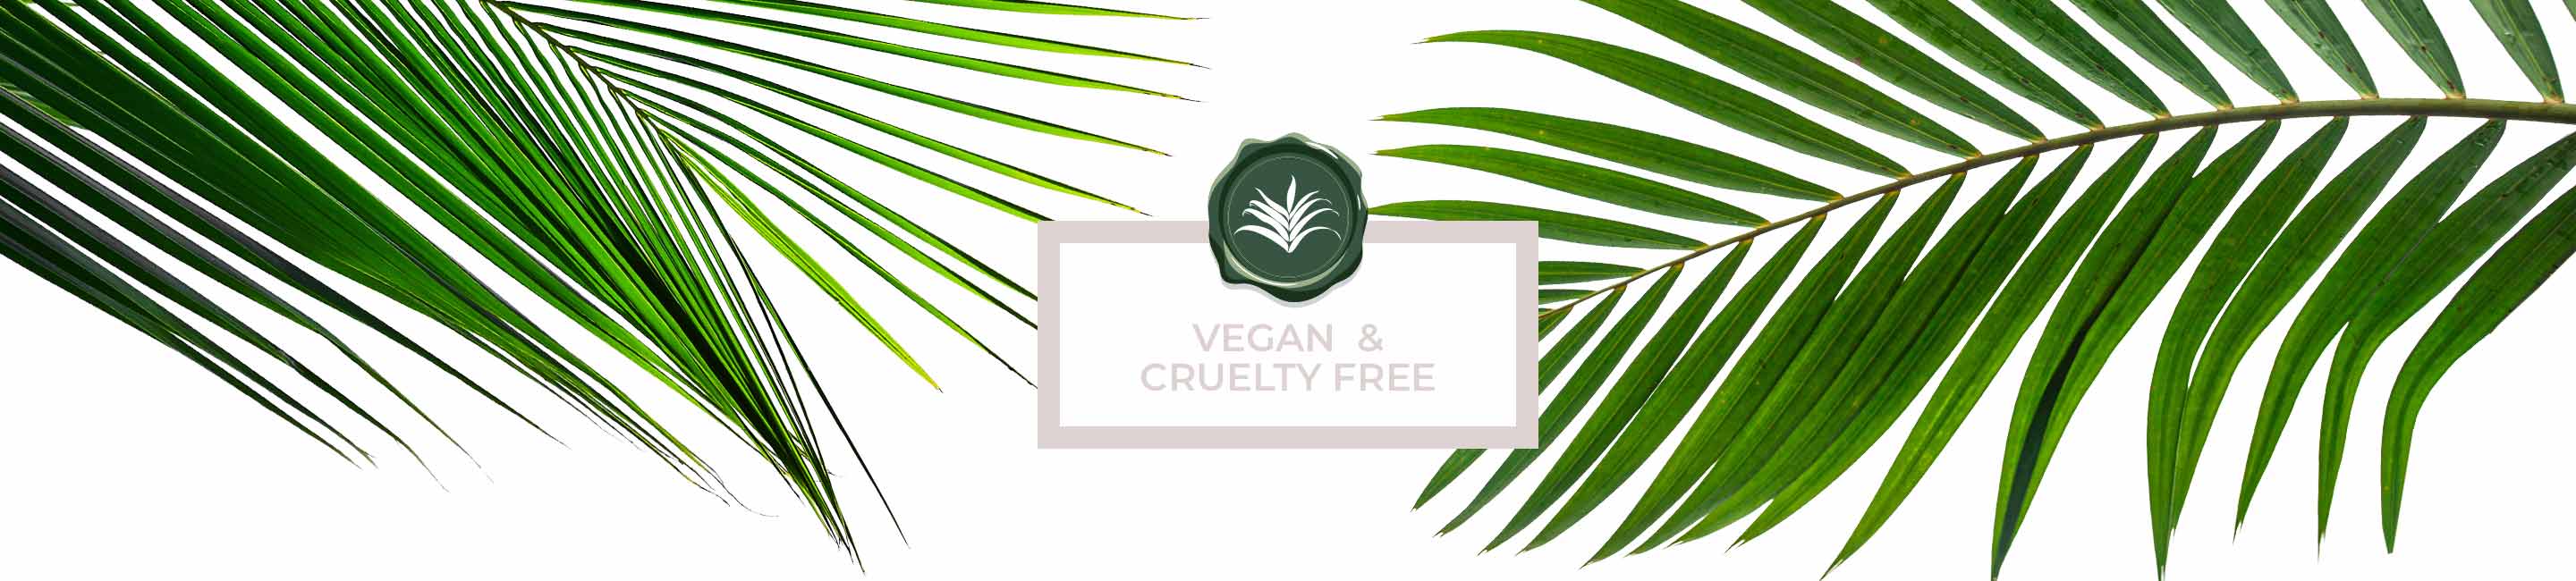 Vegan and Cruelty Free Conscious Beauty Seal with a palm background